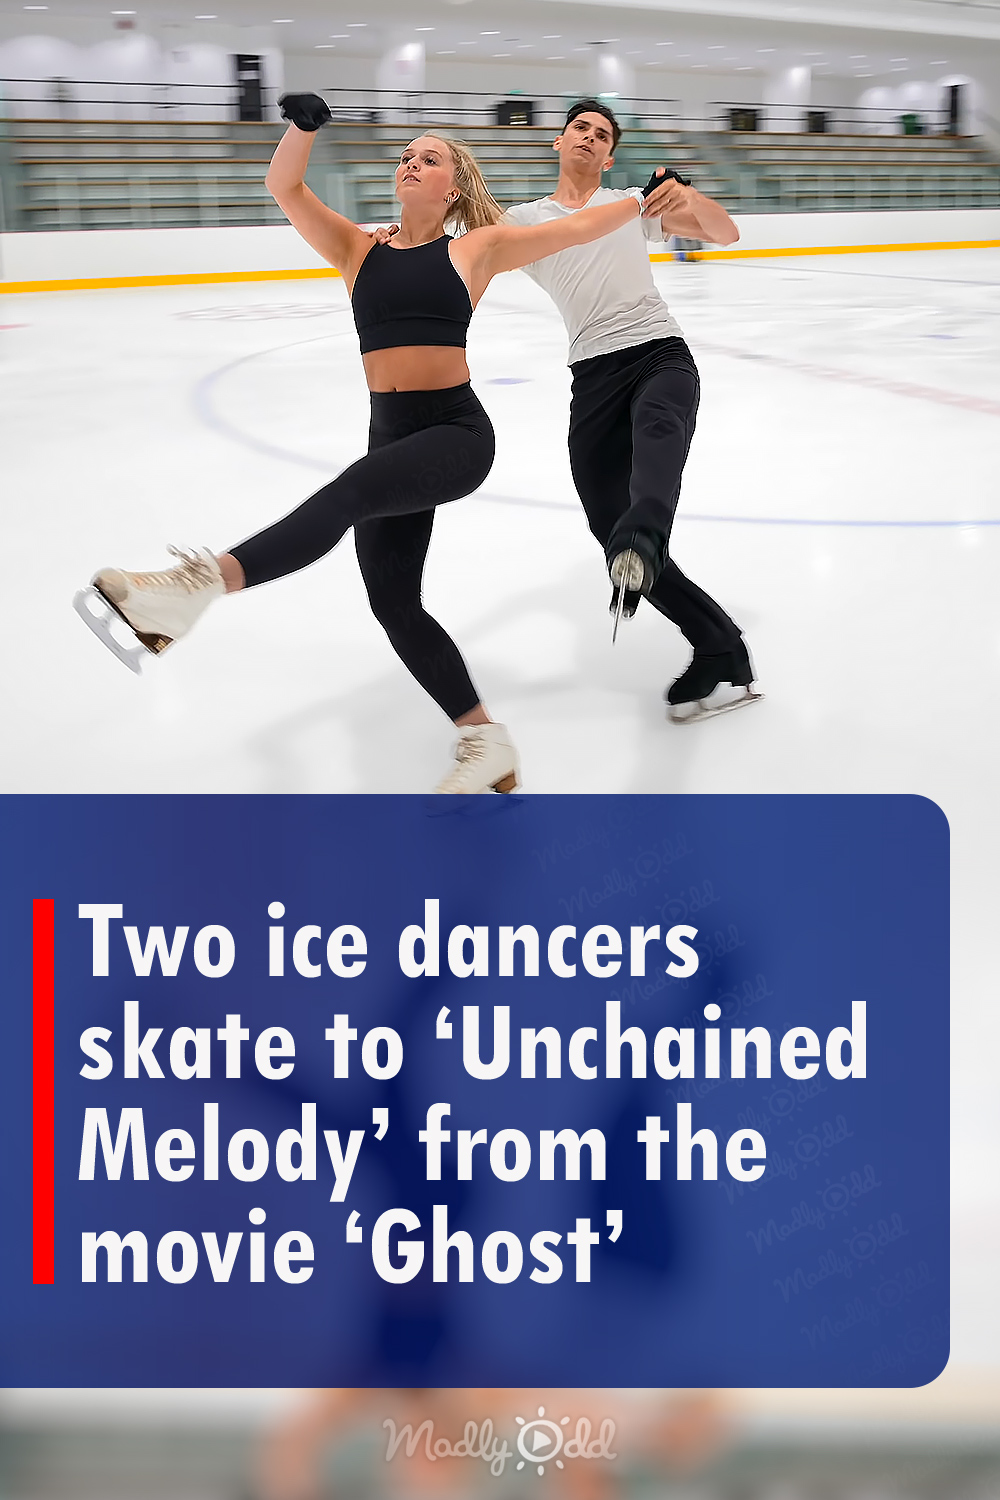 Two ice dancers skate to ‘Unchained Melody’ from the movie ‘Ghost’